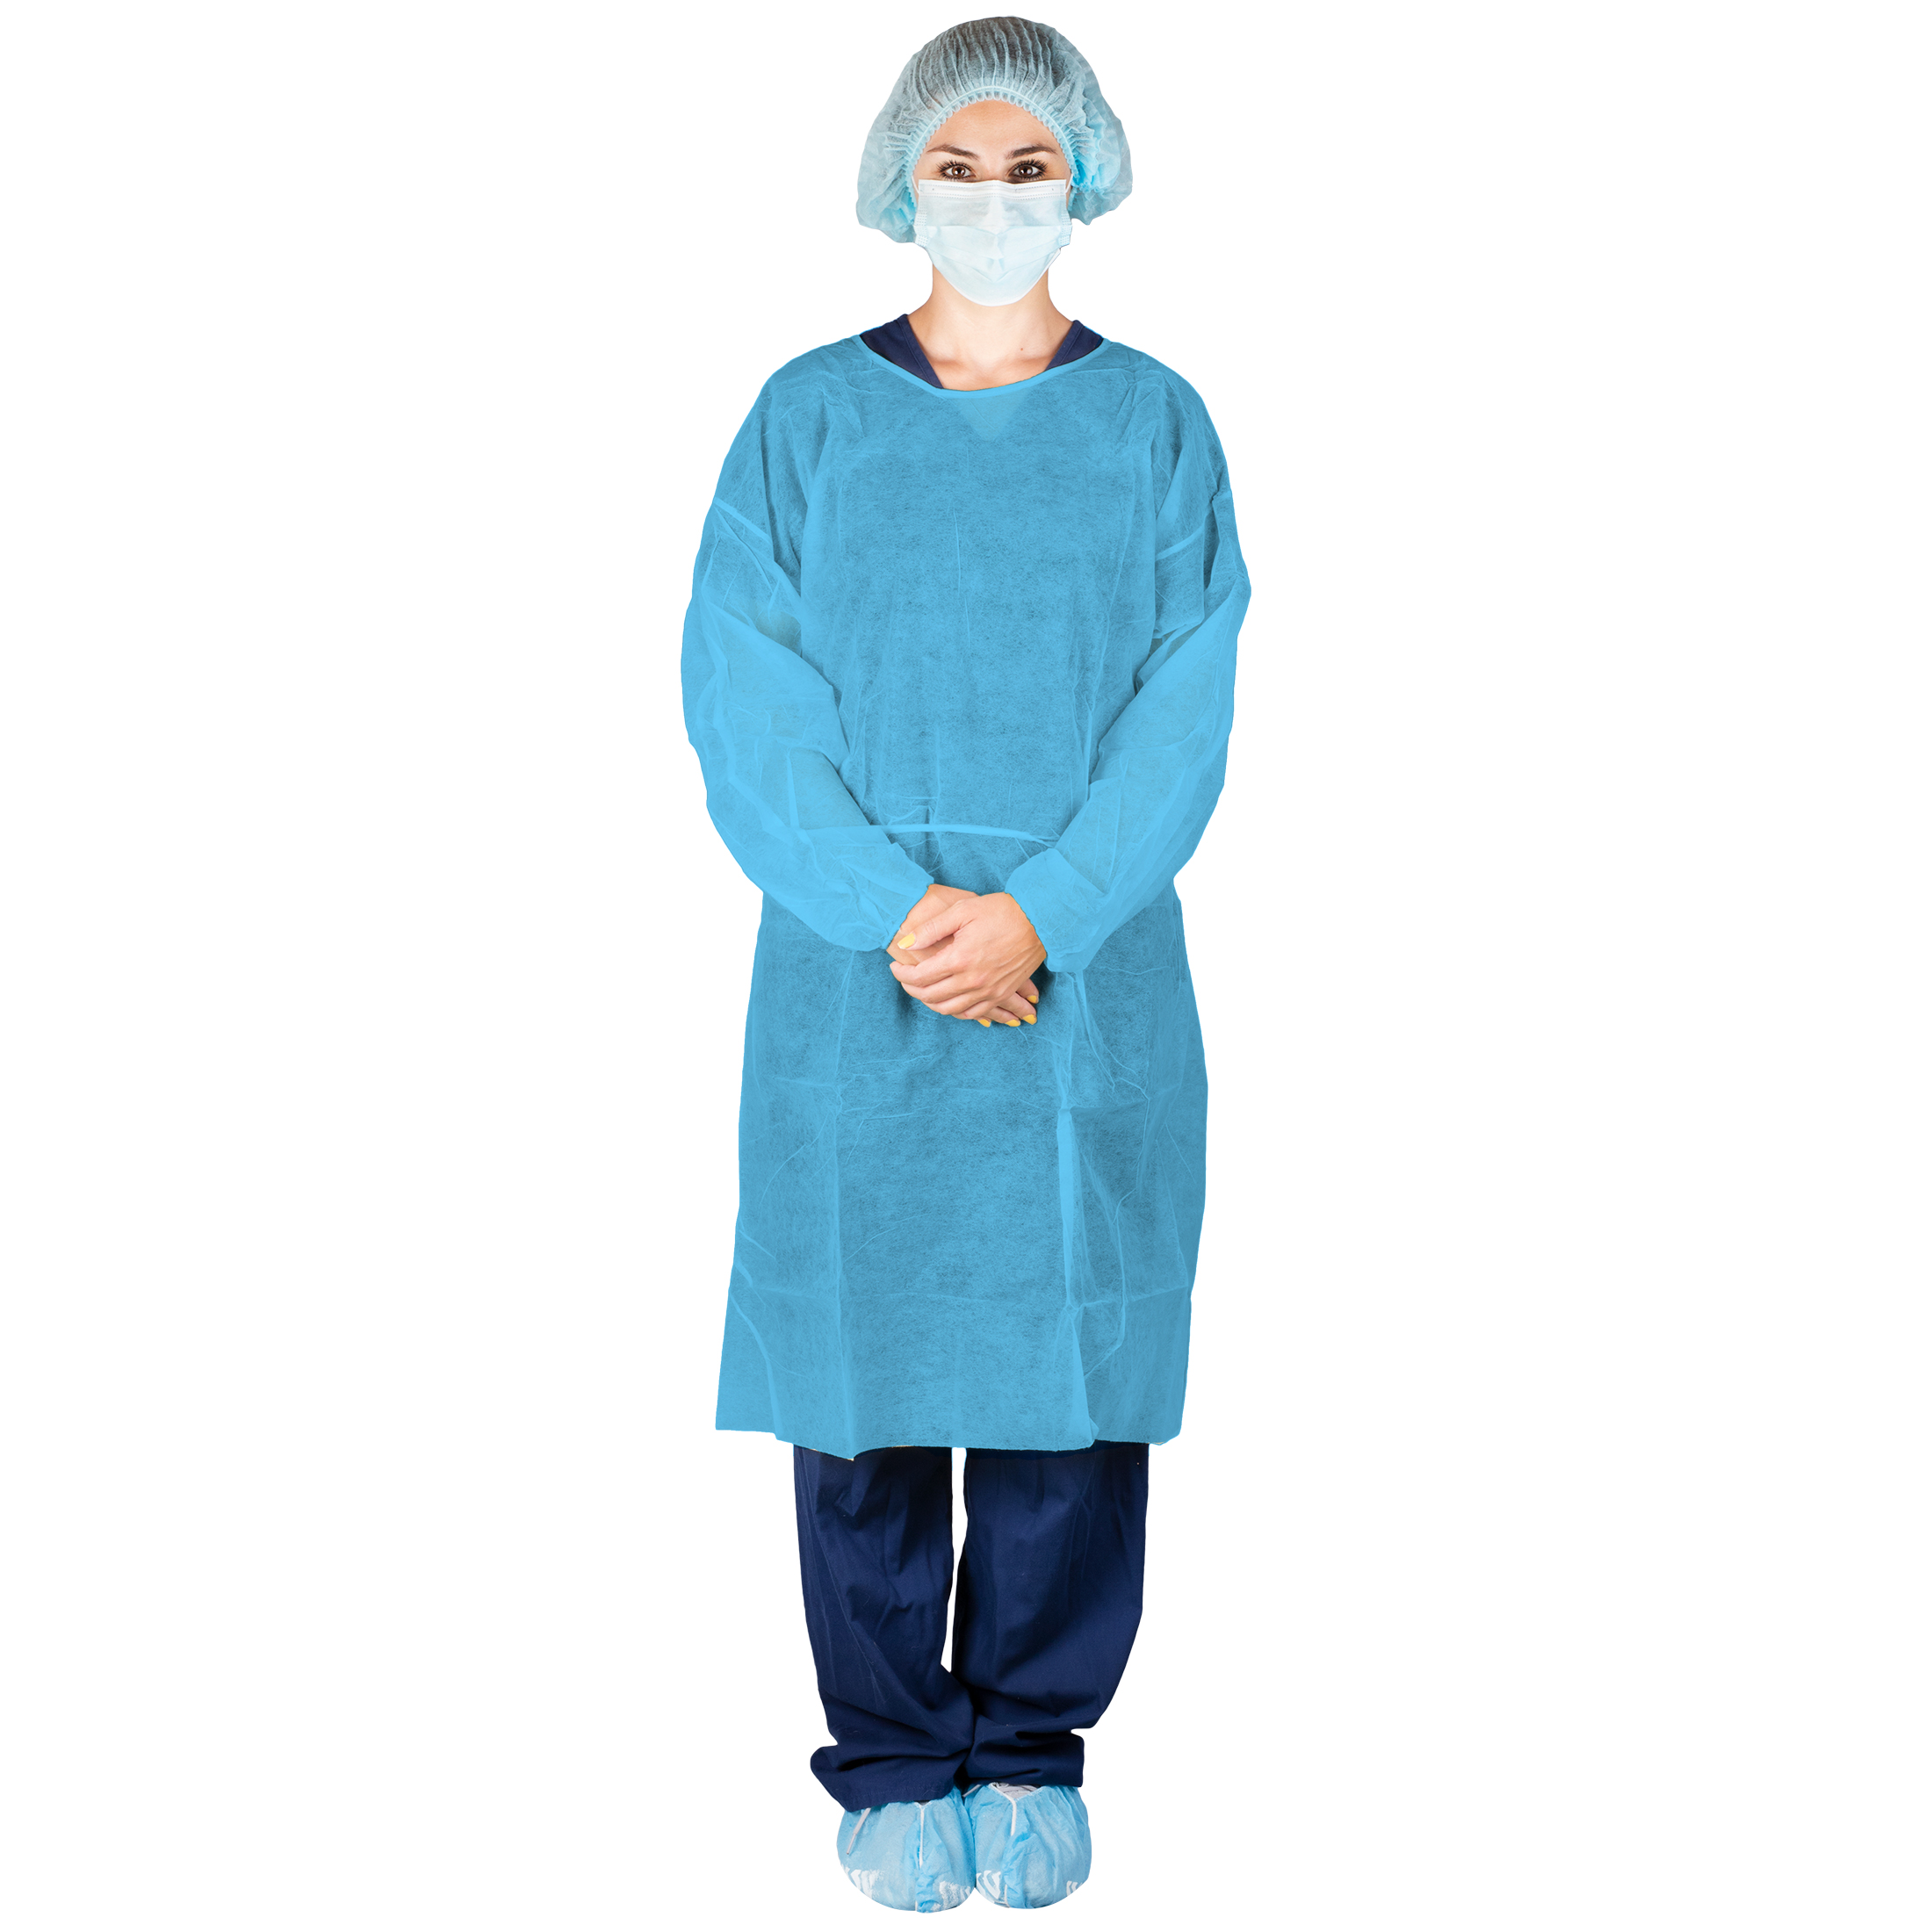 Isolation & Surgical Gowns Products, Supplies and Equipment